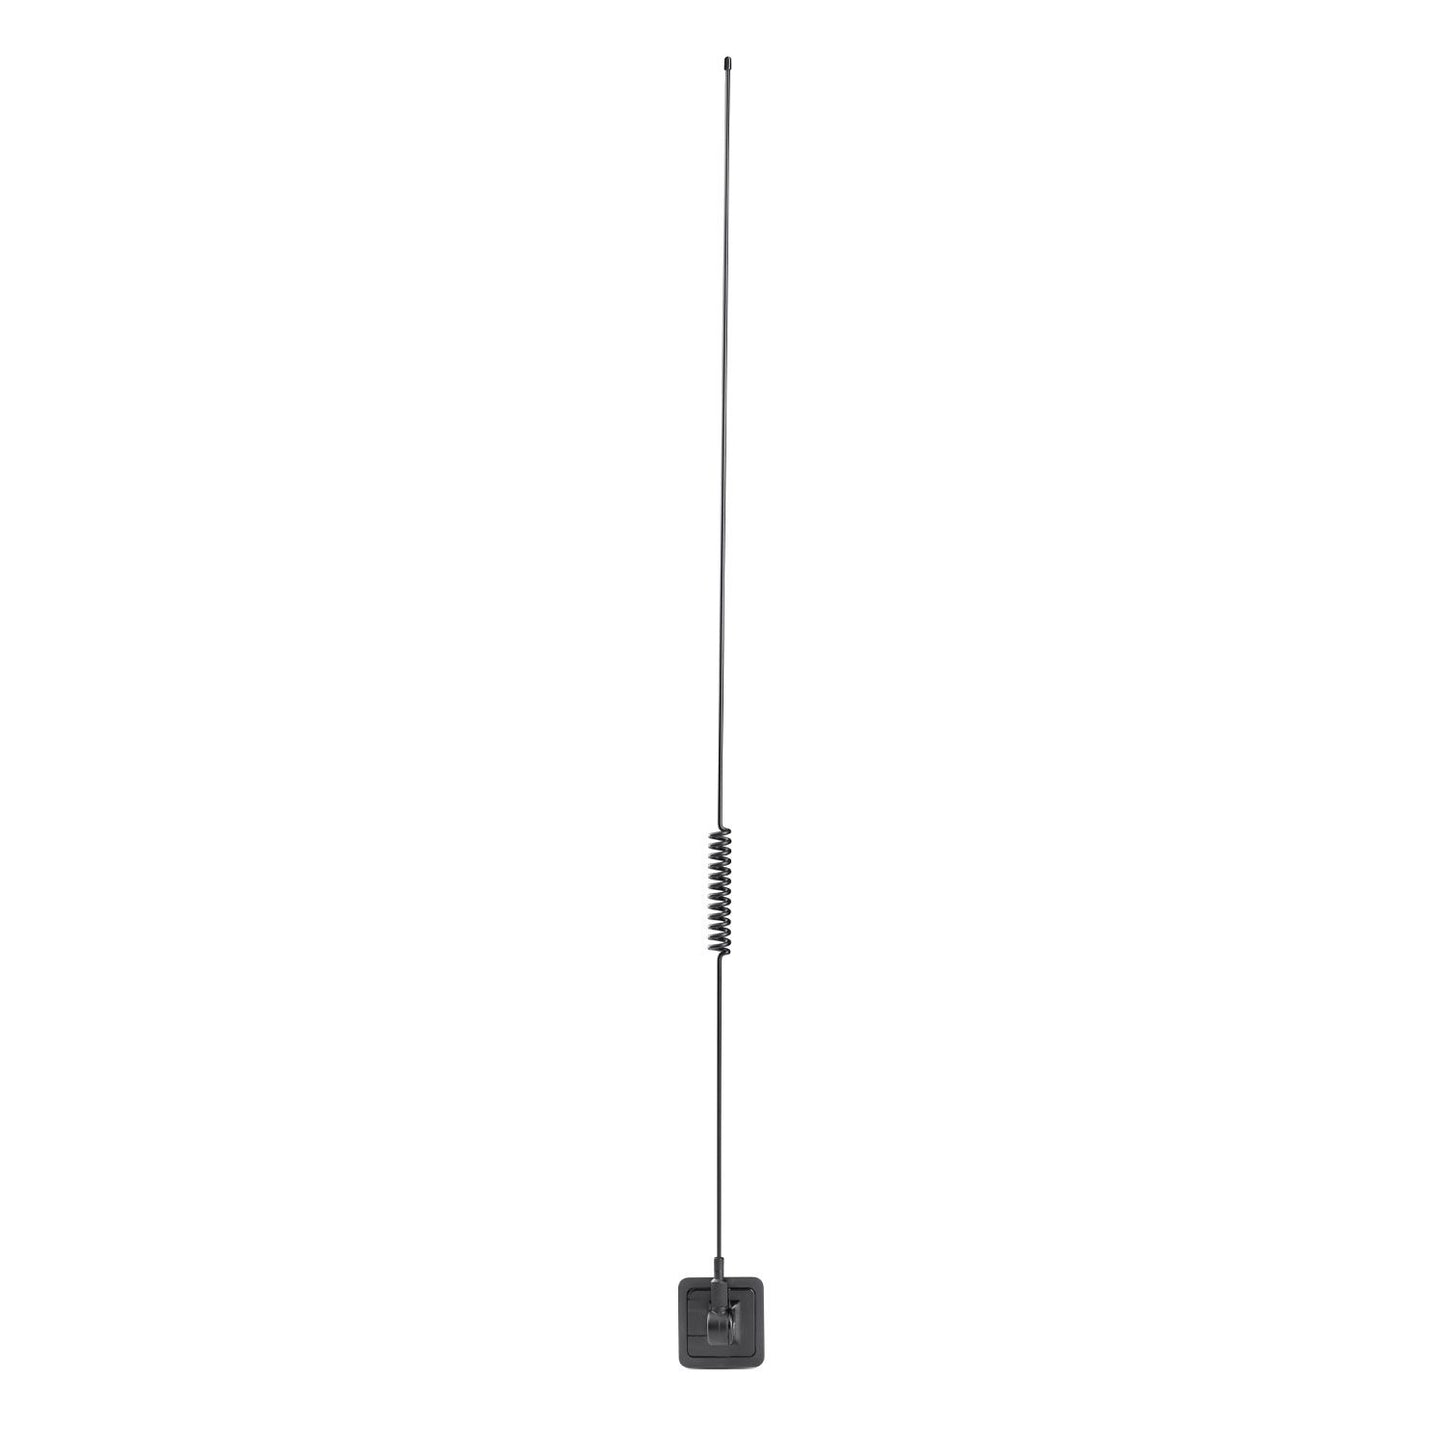 Midland CB antenna with adhesive attachment to glass, simple installation without drilling, articulated base, mounting on windscreen or window